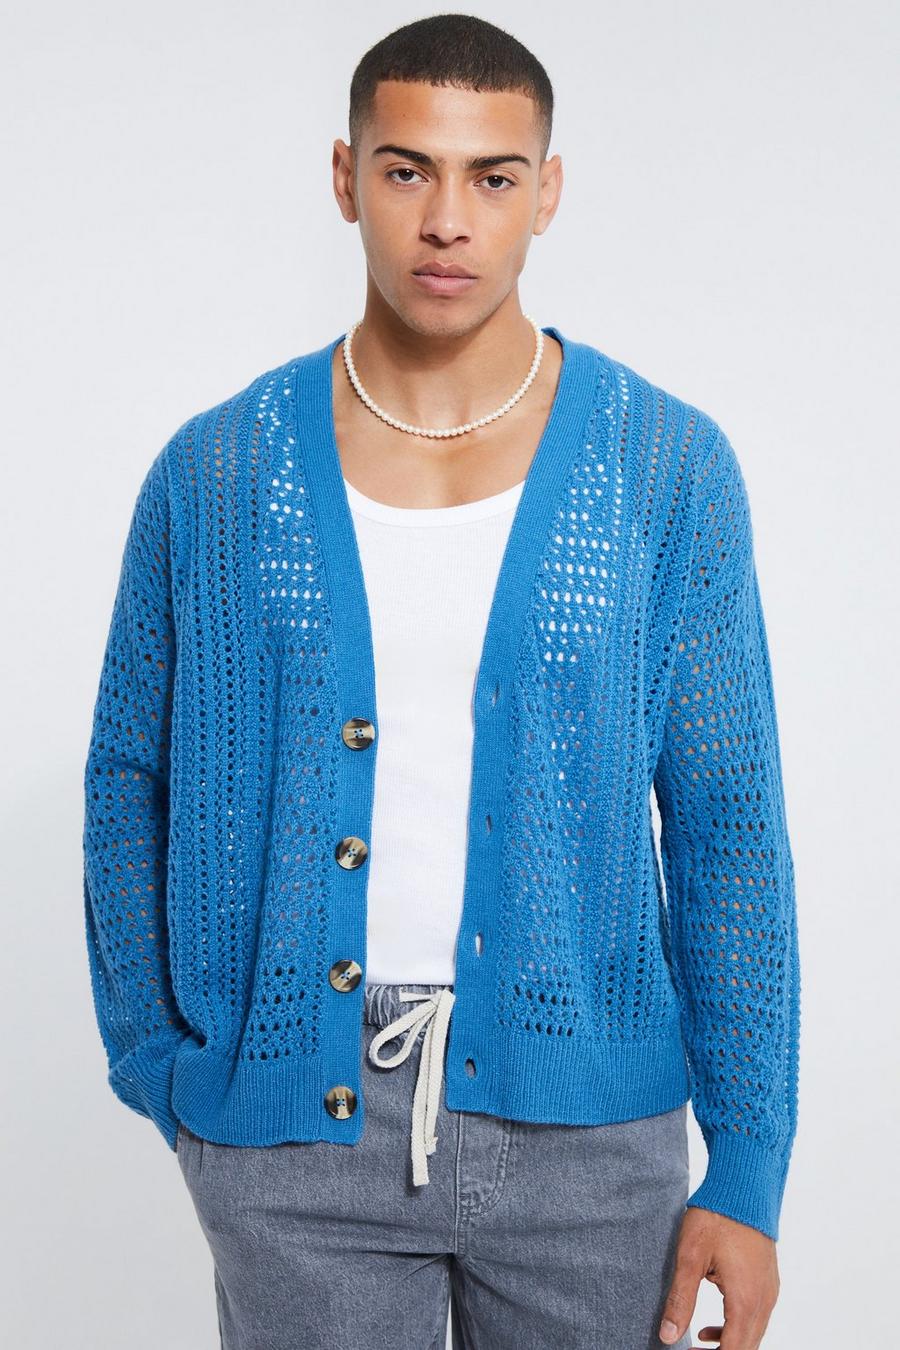 Teal gerde Knitted Dropped Shoulder Boxy Texture Cardigan